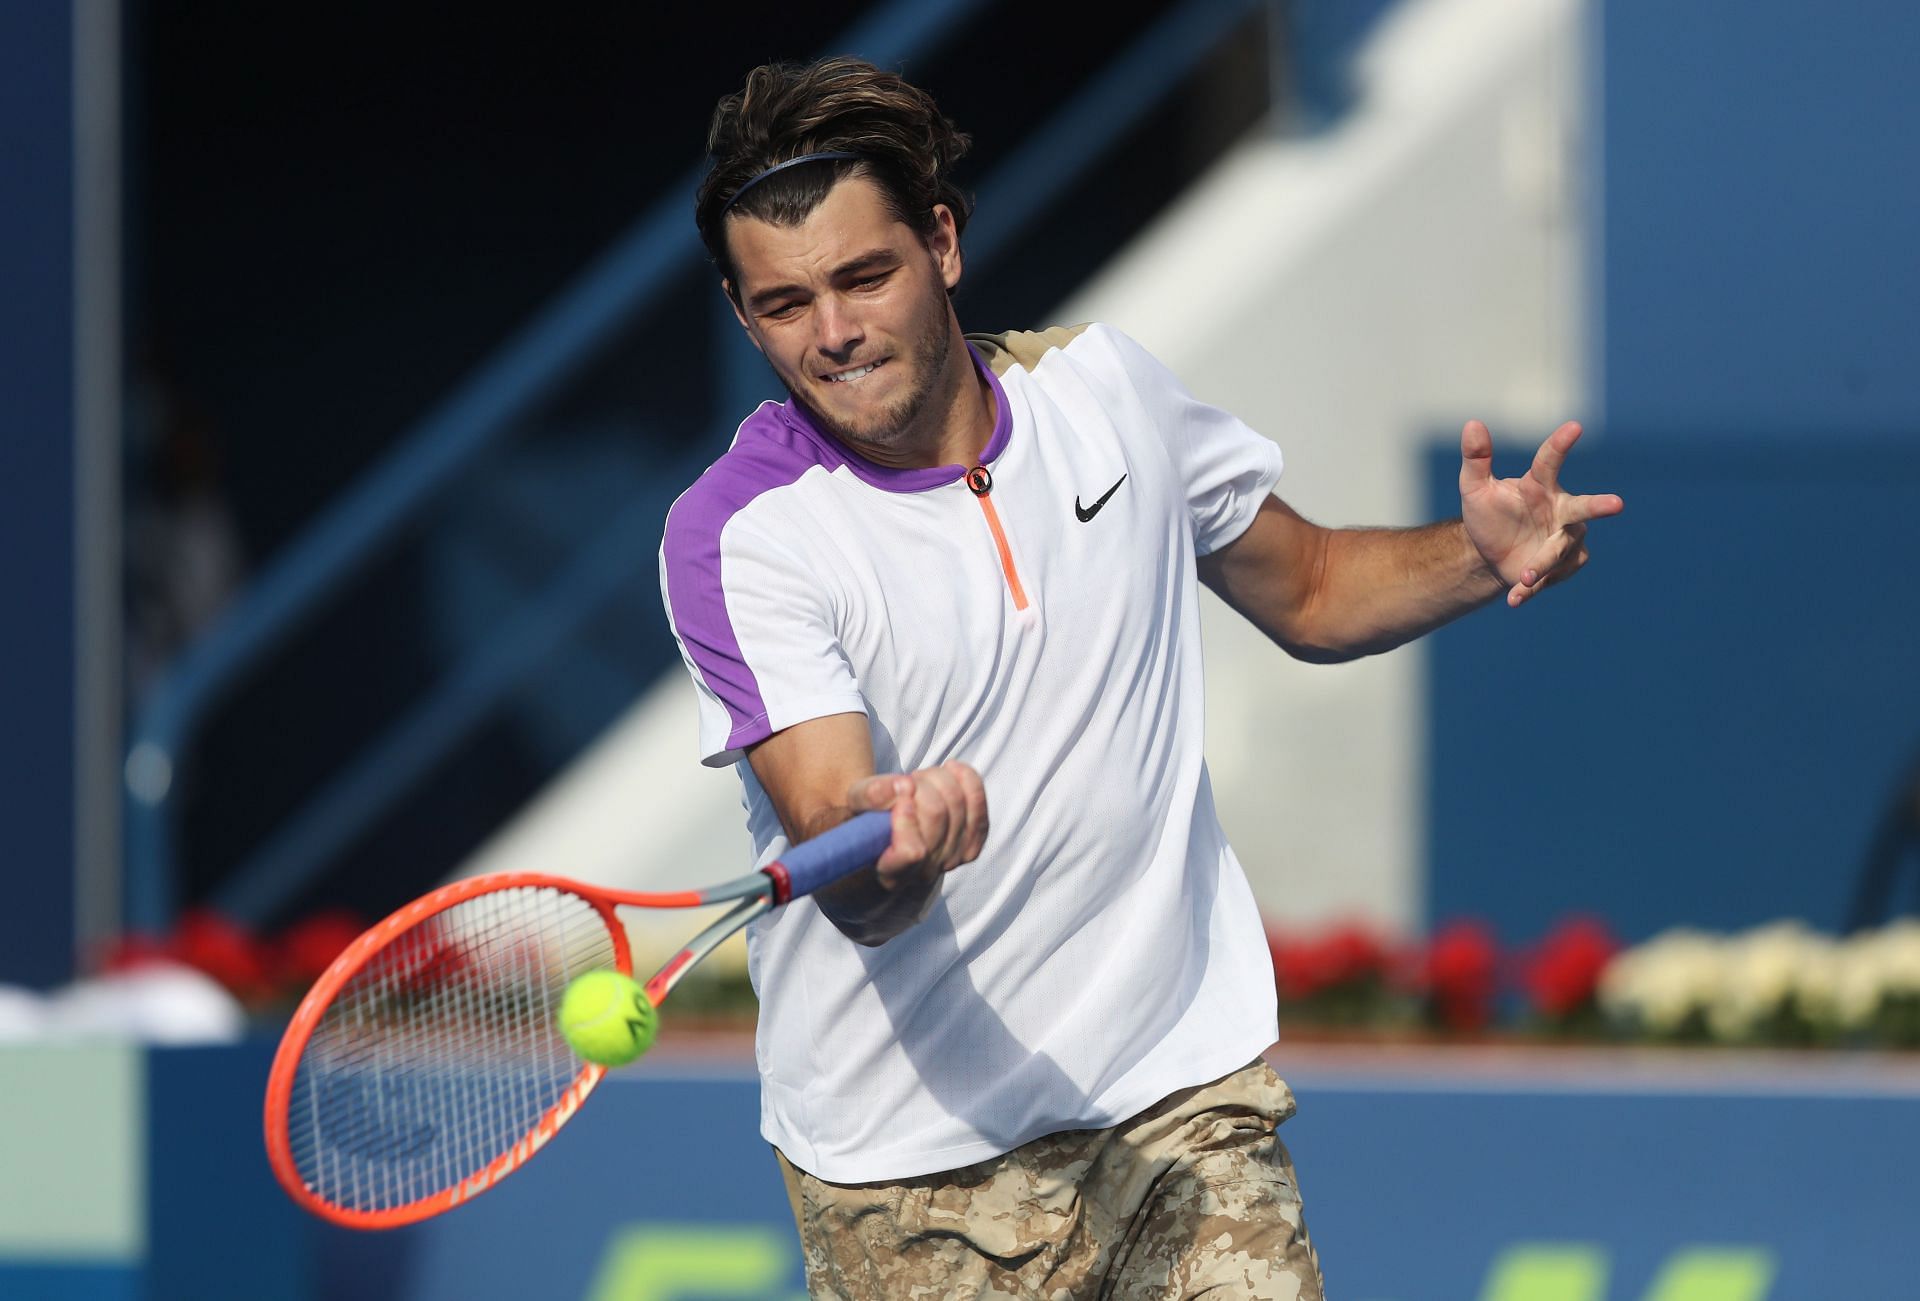 Taylor Fritz in action at the 2021 Qatar ExxonMobil Open.